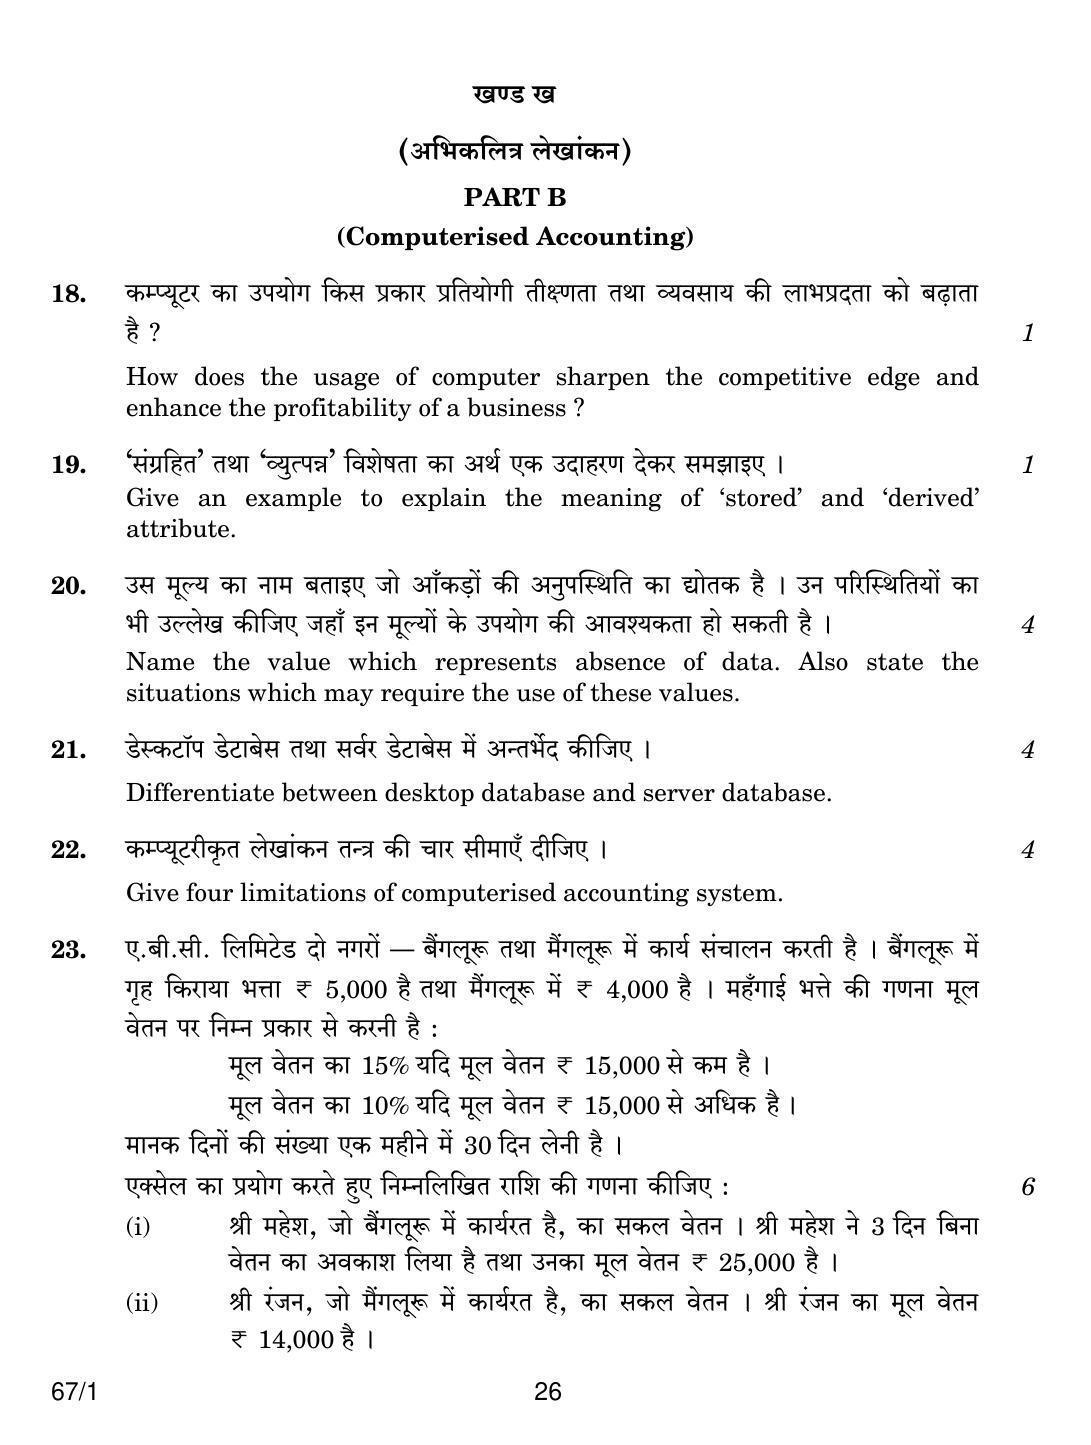 CBSE Class 12 67-1 ACCOUNTANCY 2018 Question Paper - Page 26